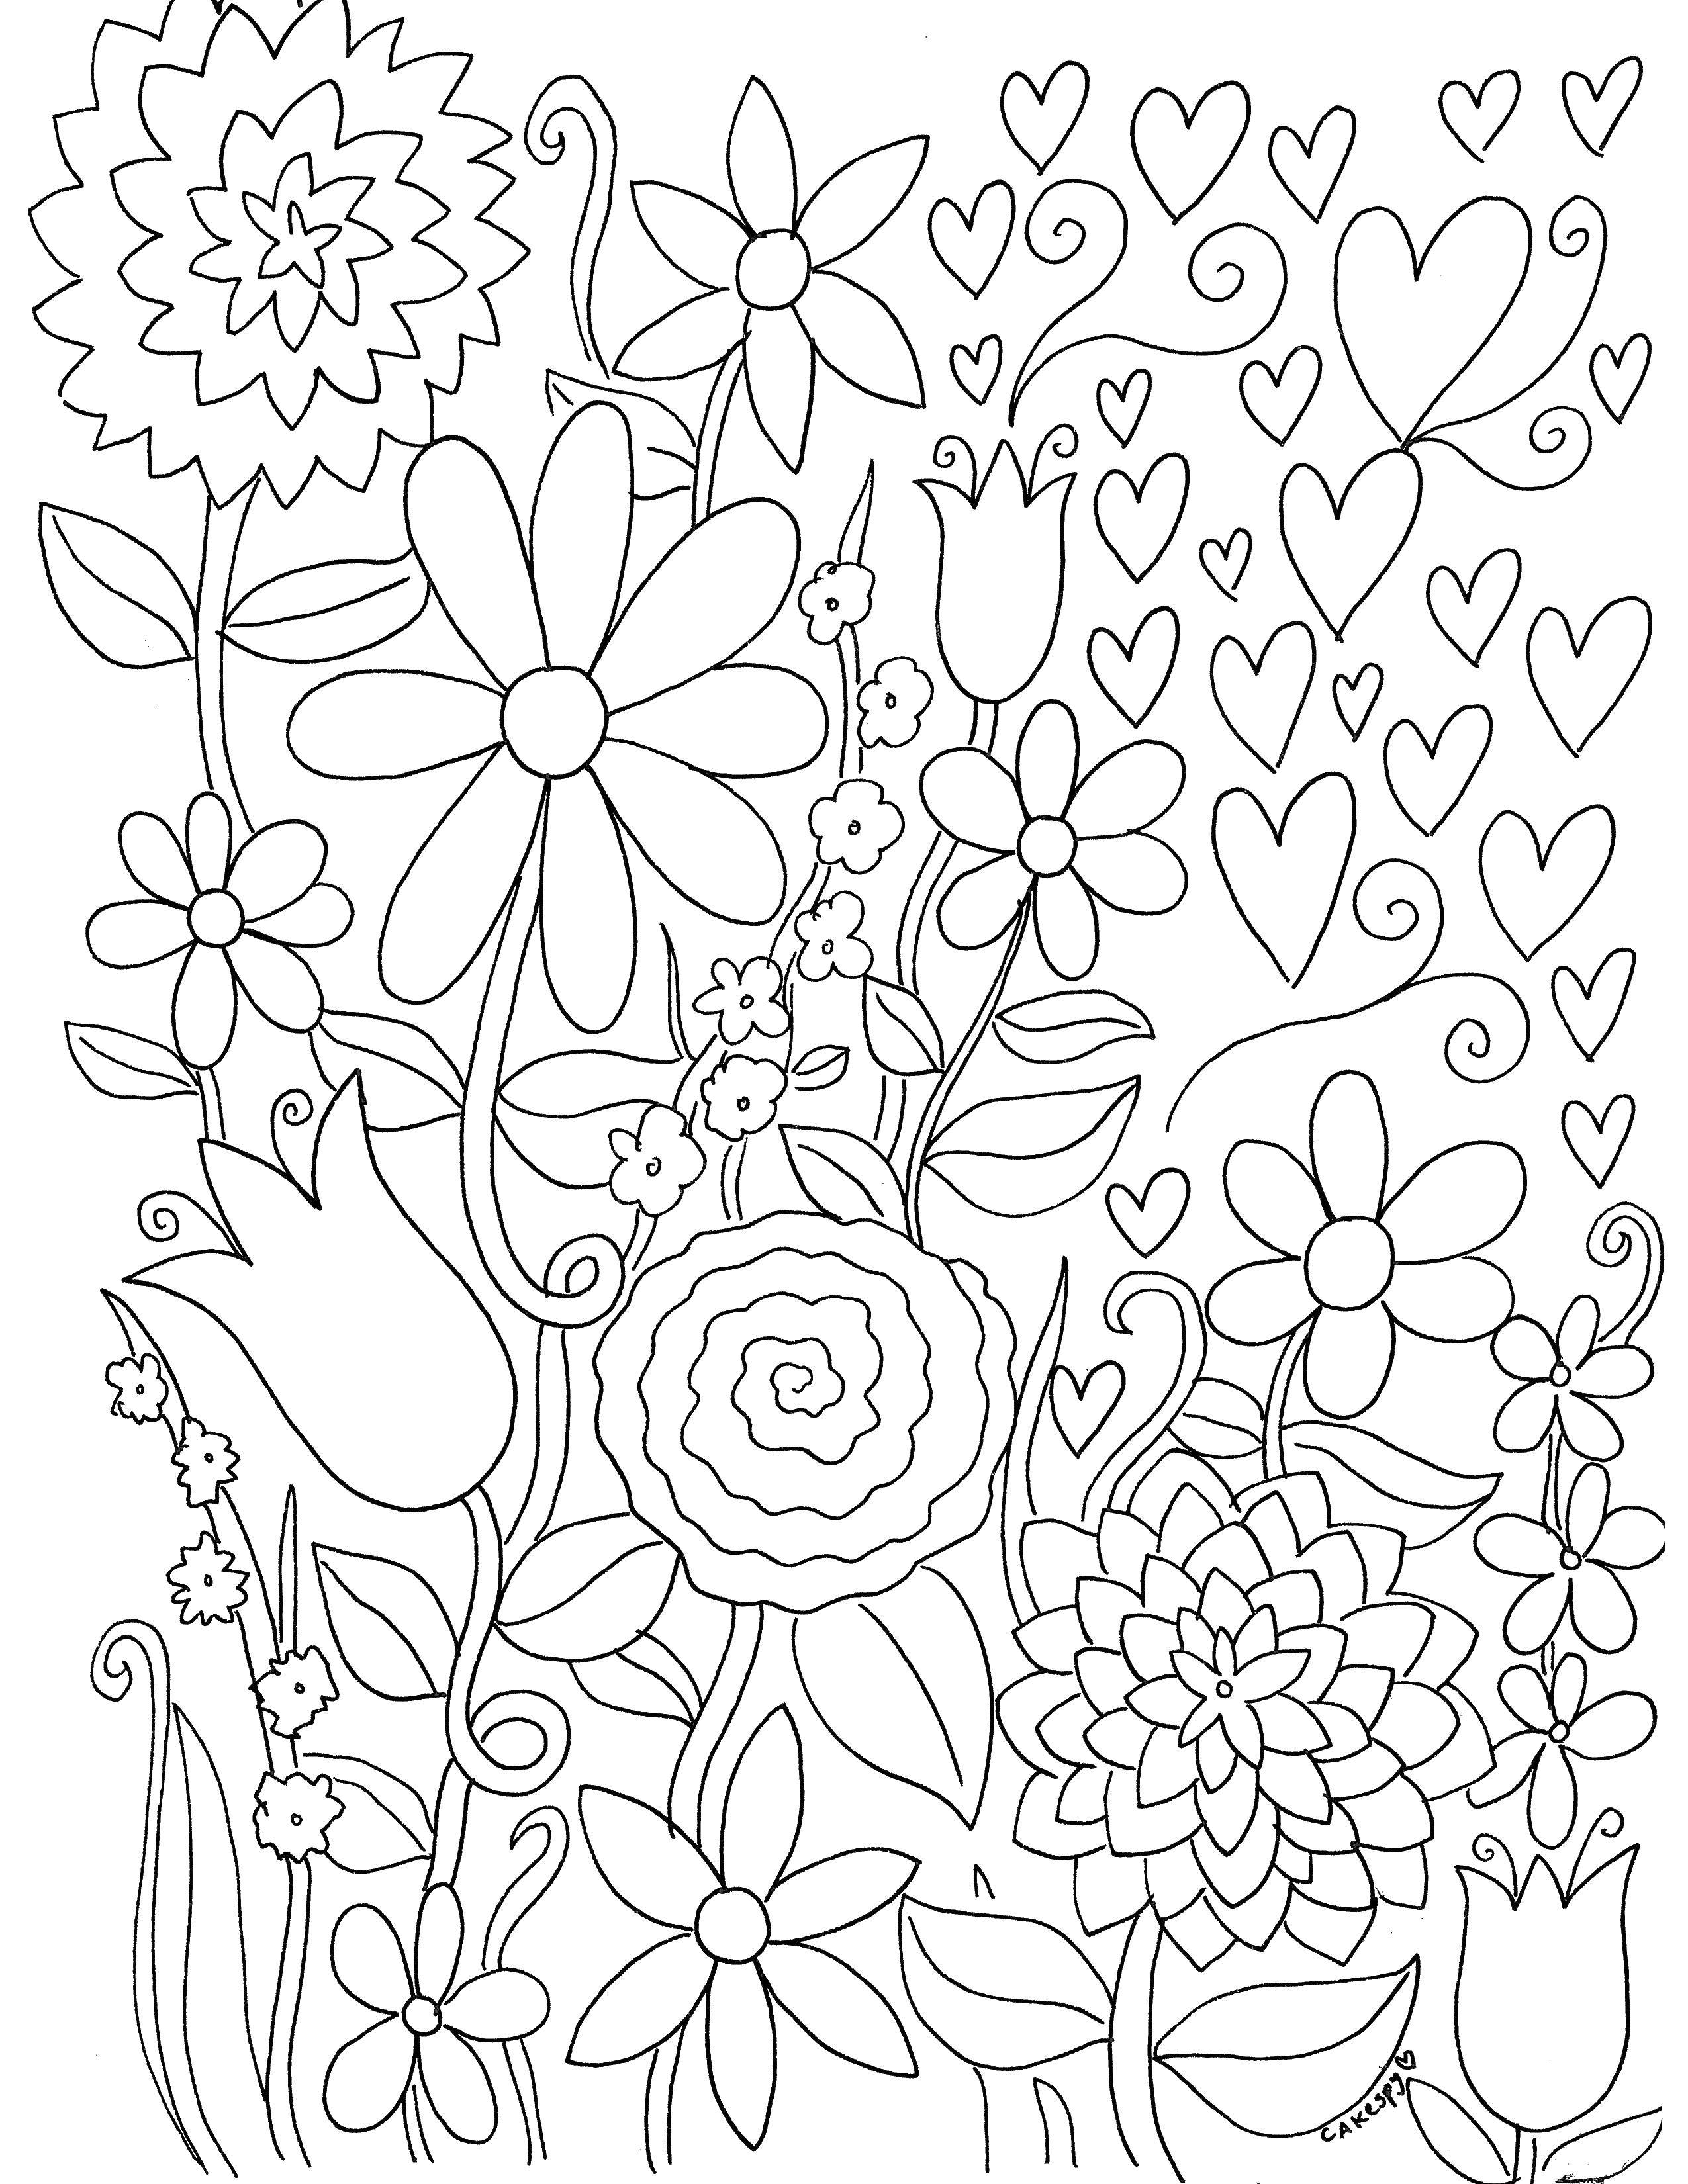 Coloring Cute pattern. Category patterns. Tags:  Patterns, flower.